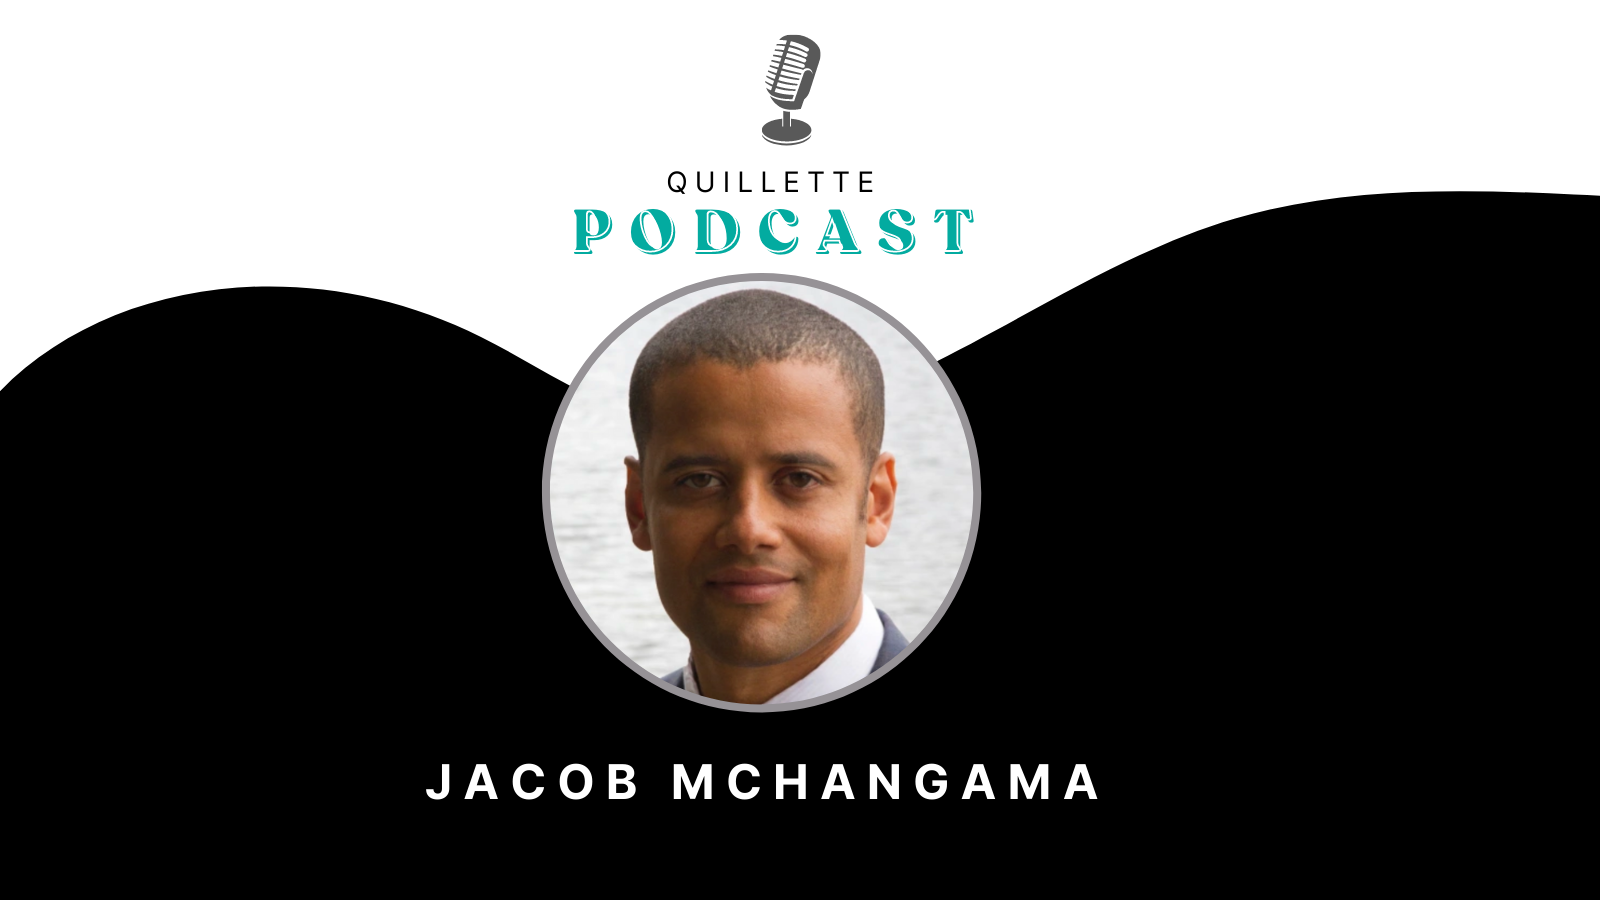 Quillette Podcast #182: Jacob Mchangama on His New Book, ’Free Speech: A History from Socrates to Social Media’